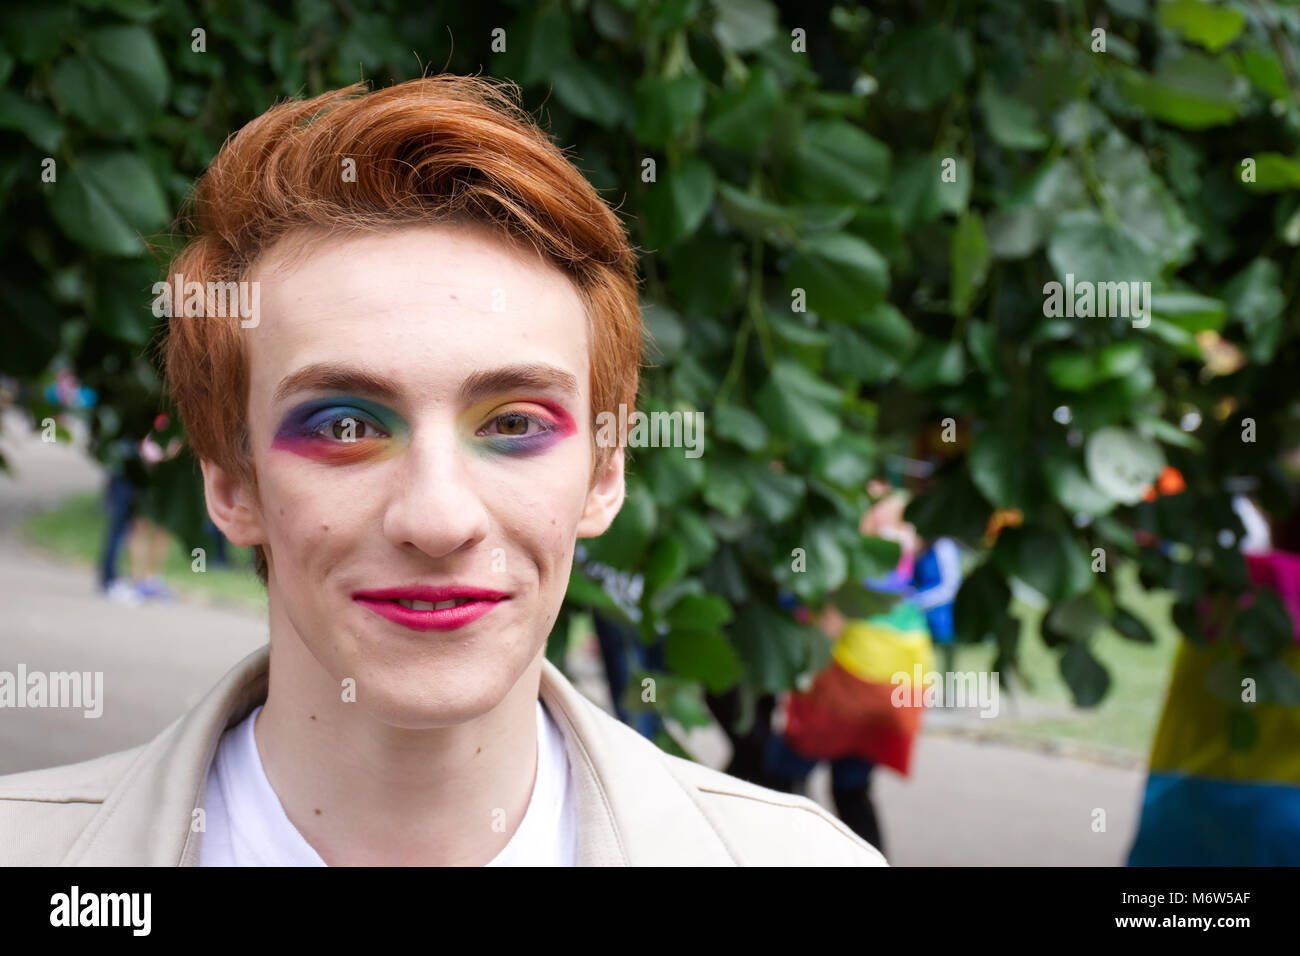 Breaking male gender stereotype,Transgender Uk,LGBT.Man wearing makeup.Out and proud.LGBT Pride event,Stoke on Trent,Staffordshire,UK.24 June 2017. Stock Photo